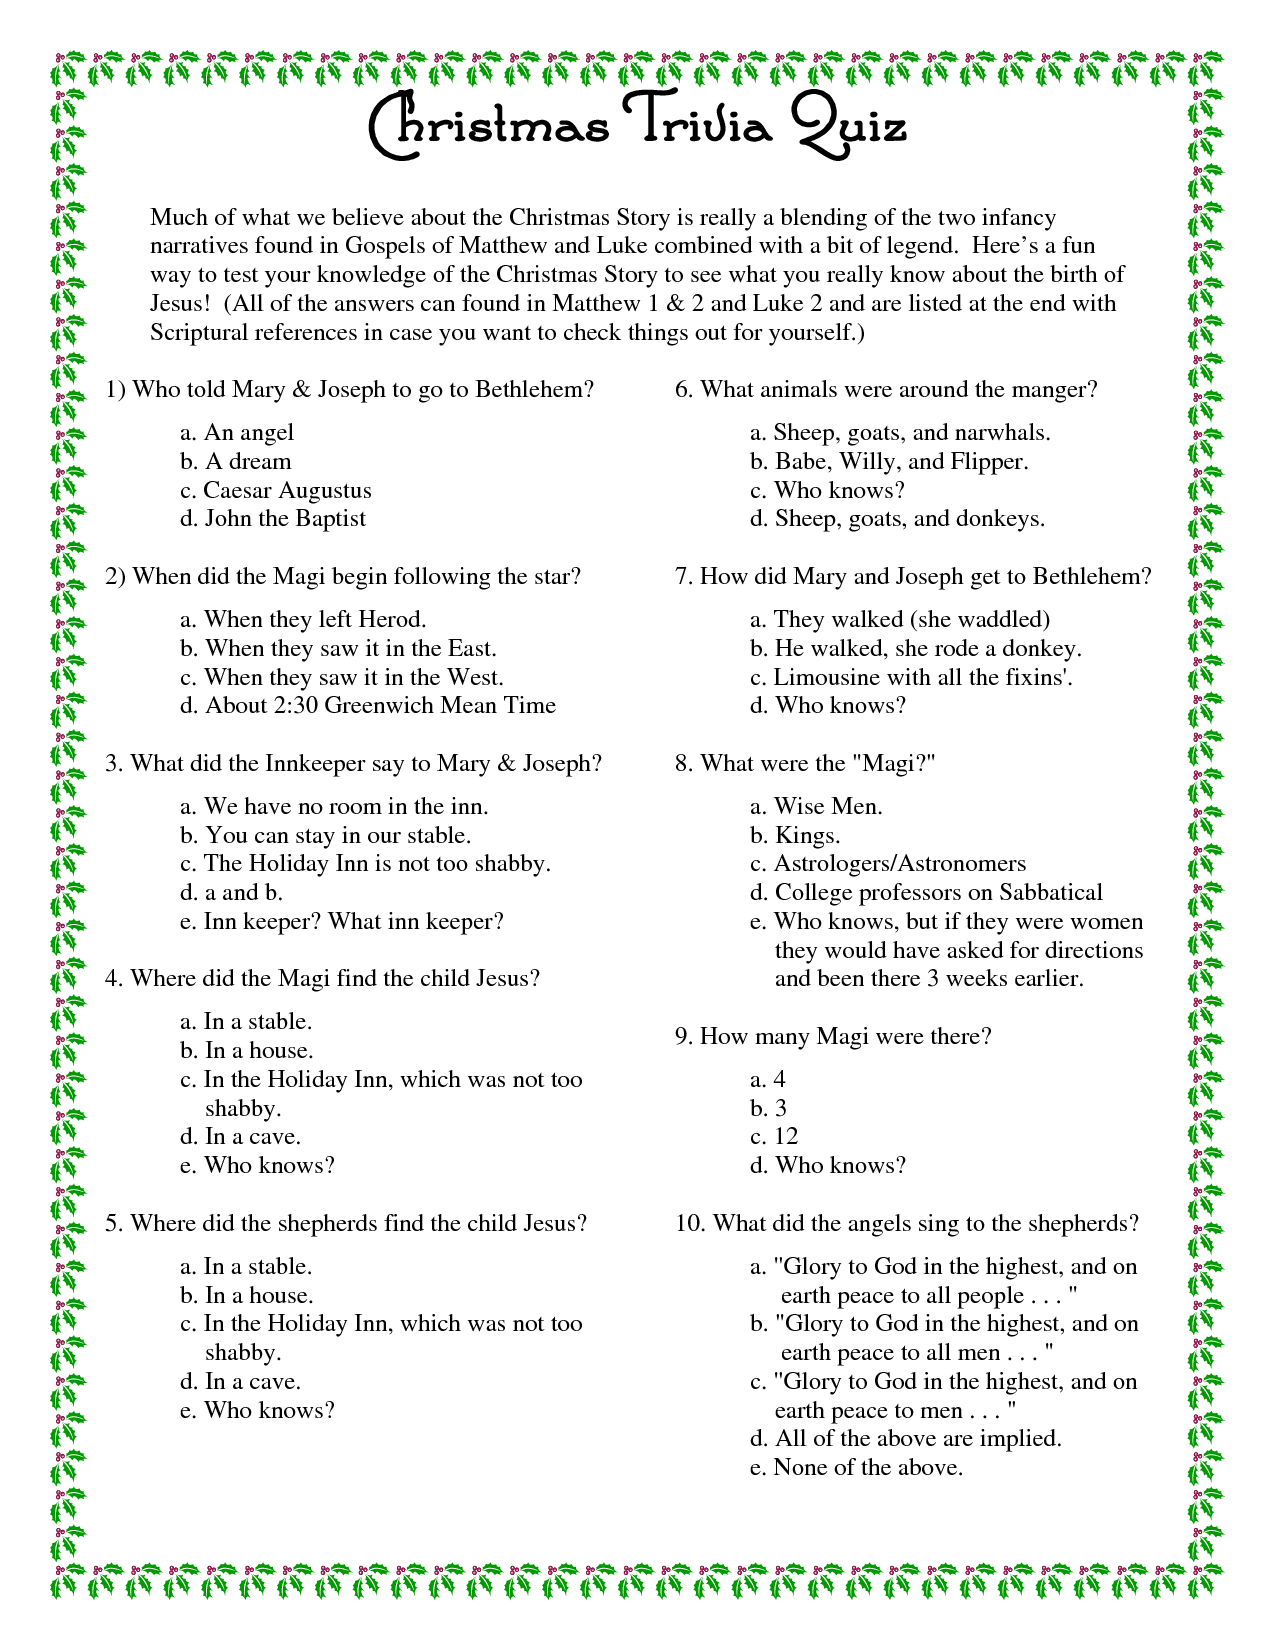 Printable Christmas Trivia Questions And Answers | Christmas Party - Free Printable Trivia Questions And Answers